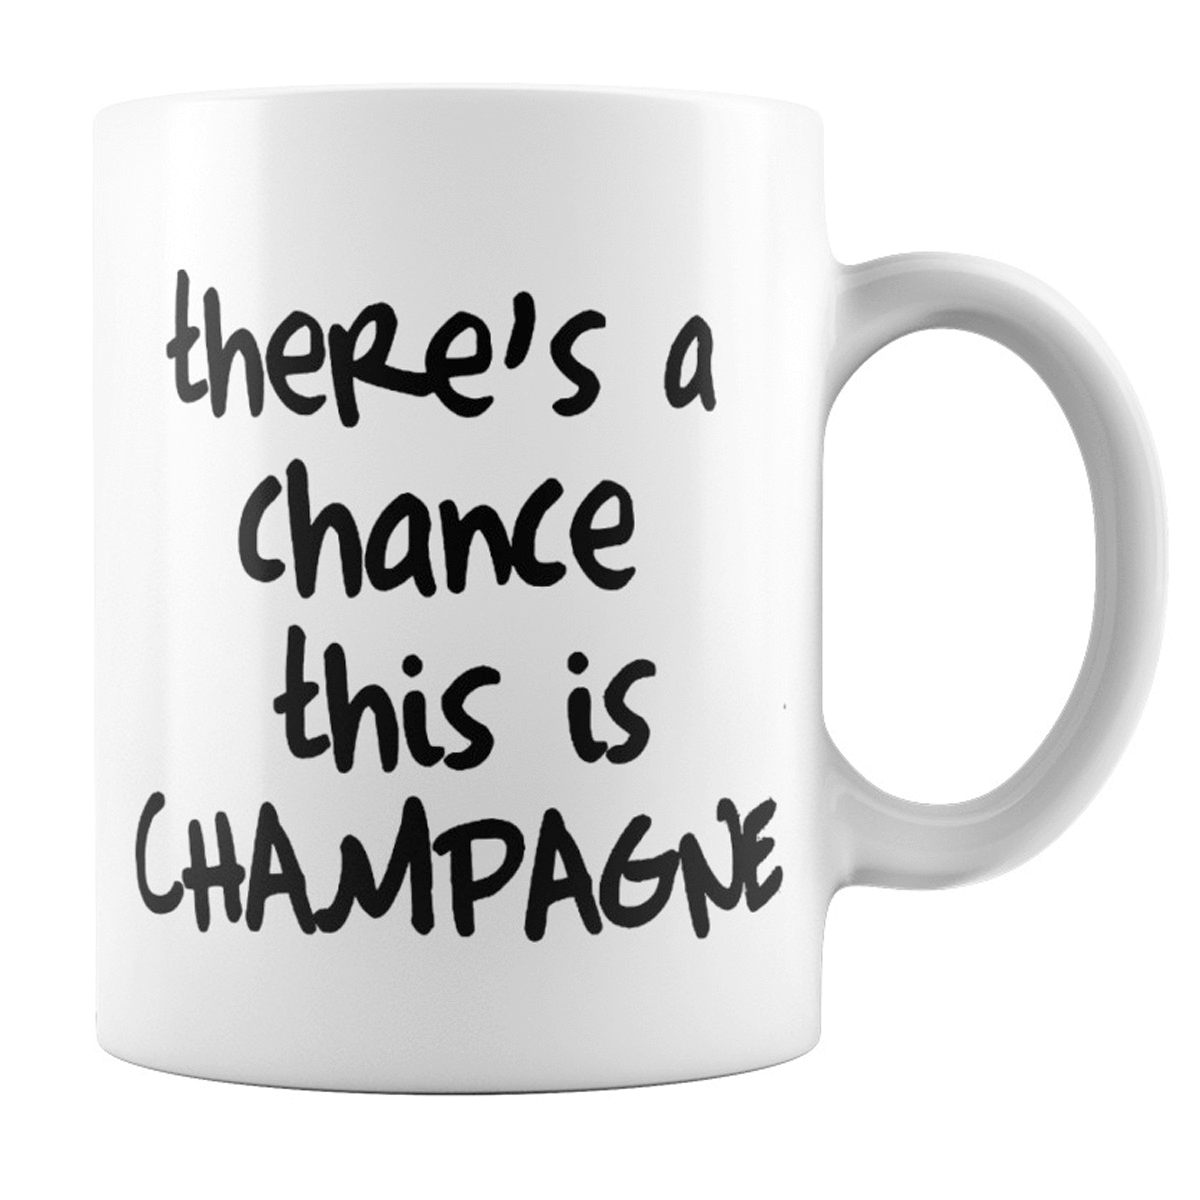 Theres A Chance This is Champagne - 11 Oz Coffee Mug